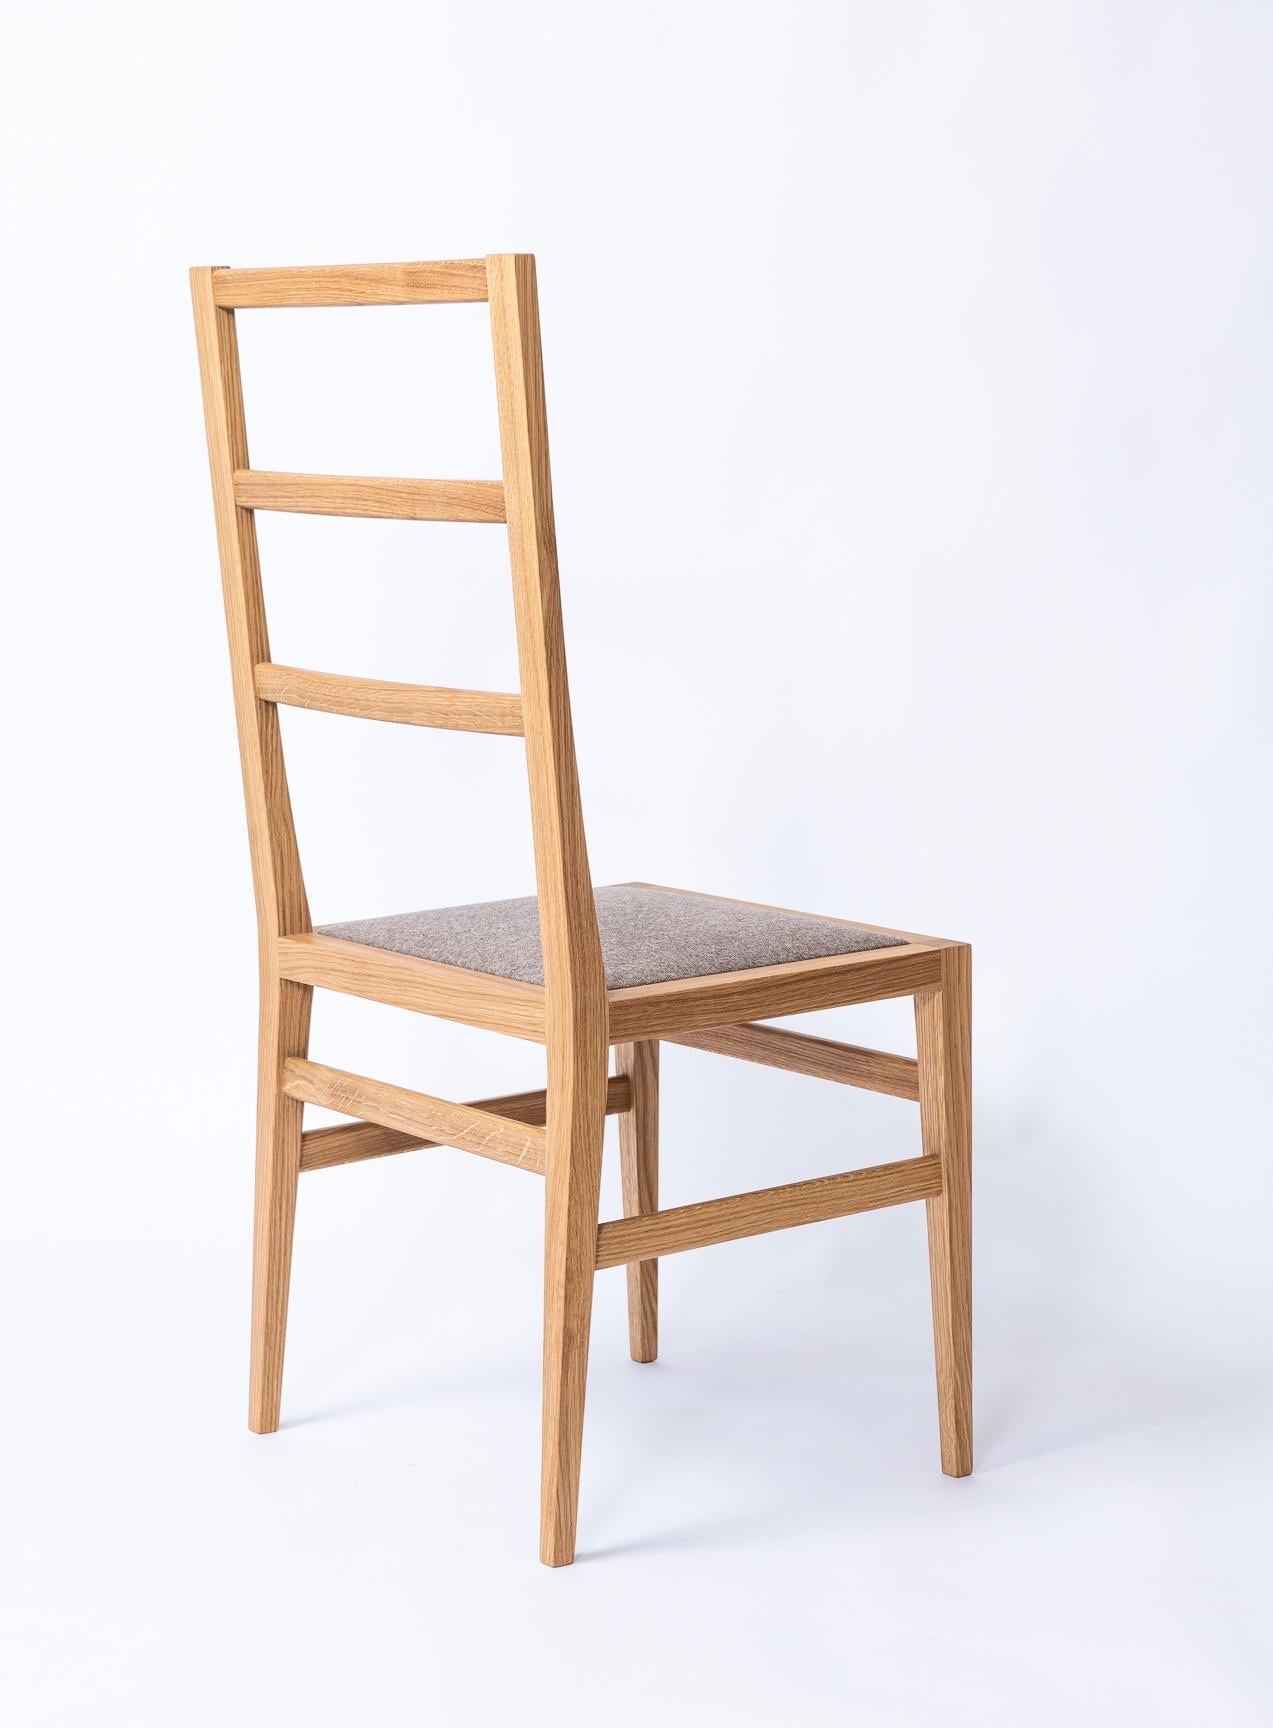 Hand-Crafted Ladder Back Dining Chair in White Oak by Boyd and Allister  For Sale